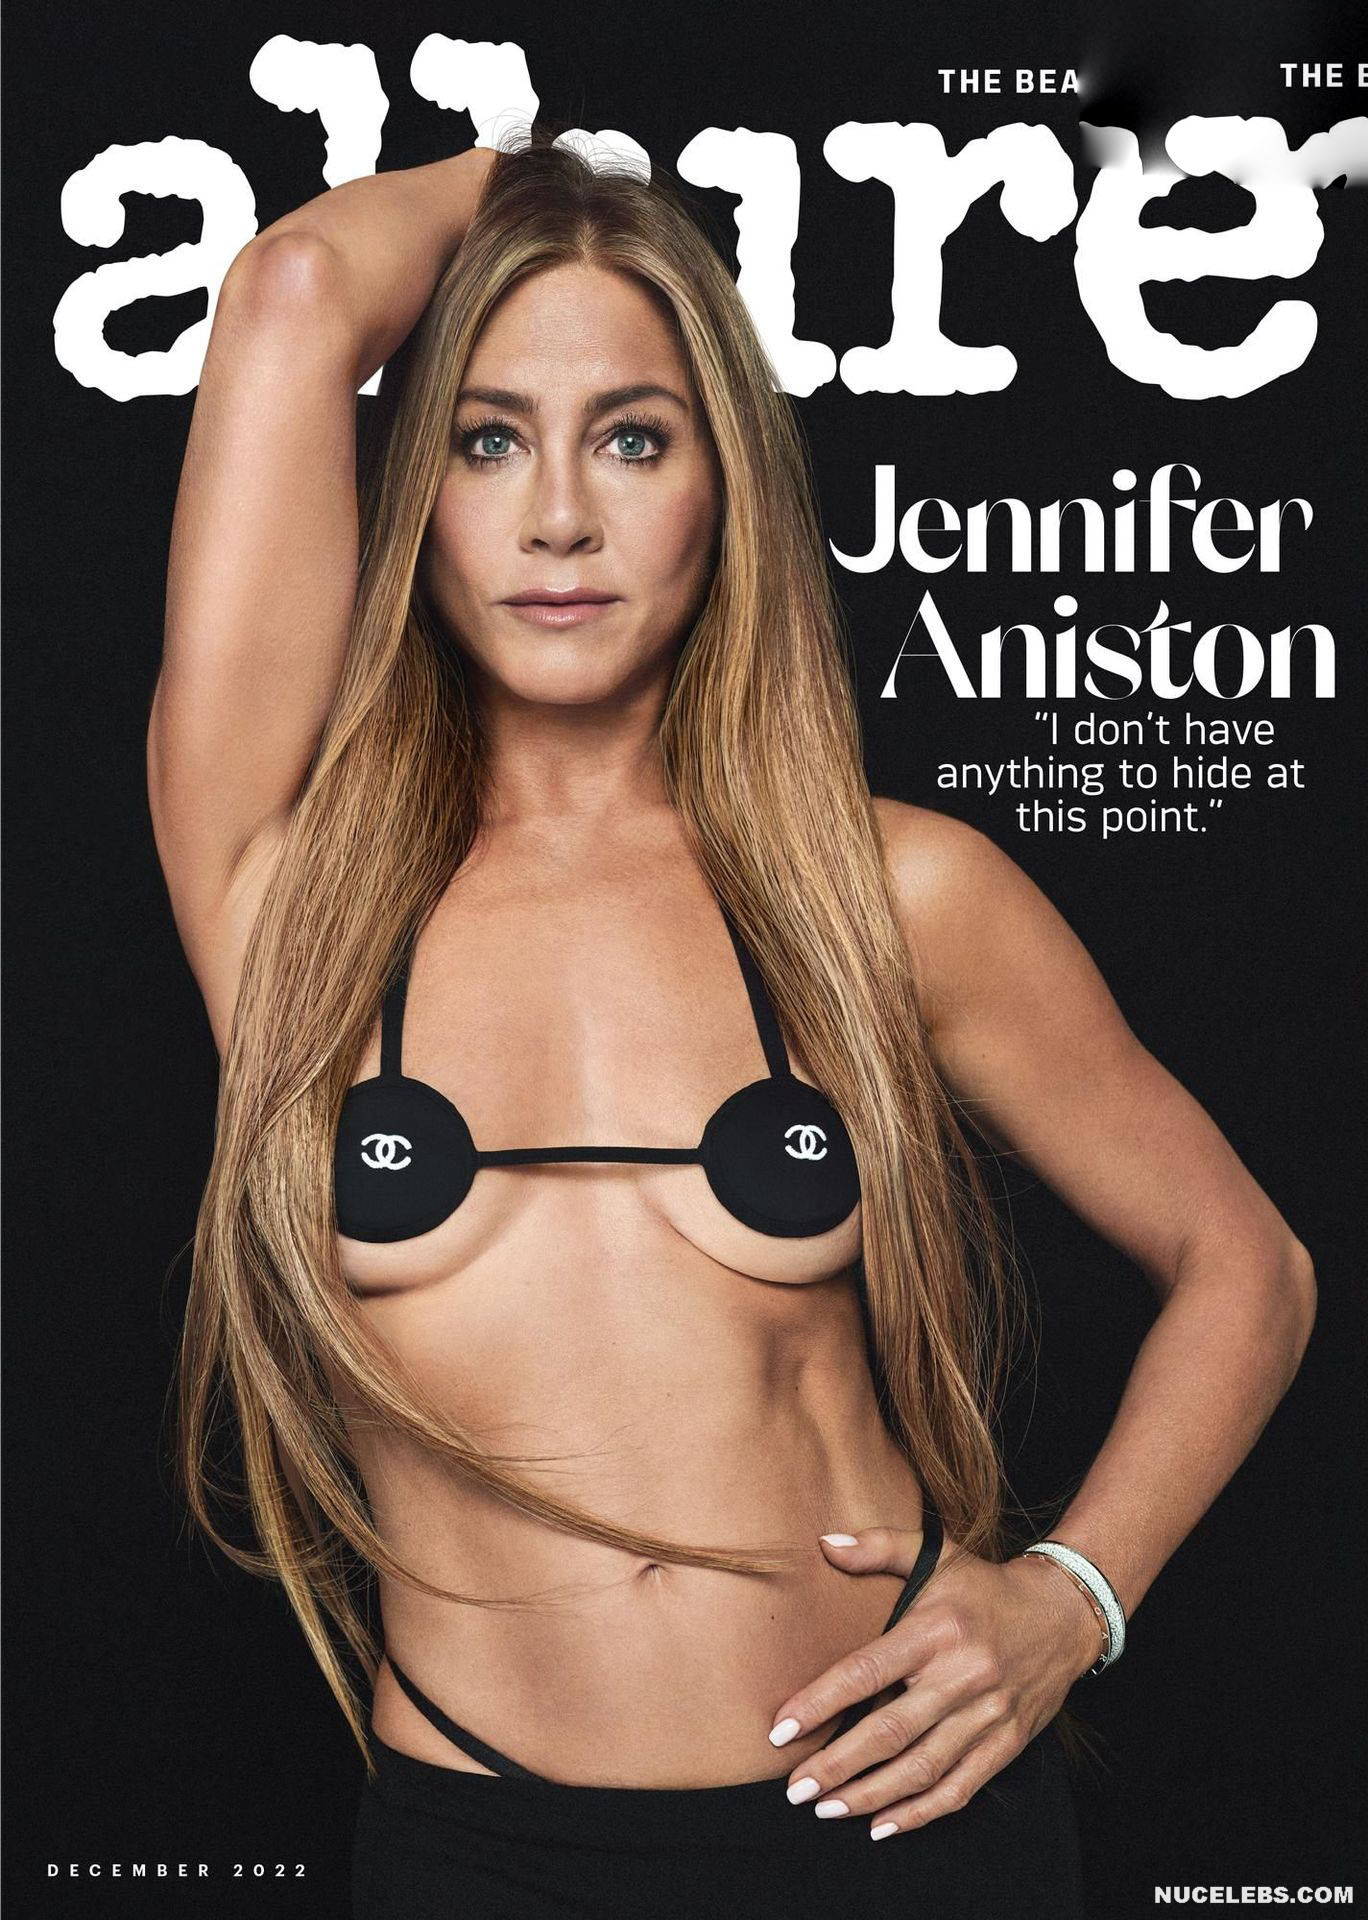 chelsea skurow recommends jennifer aniston naked images pic